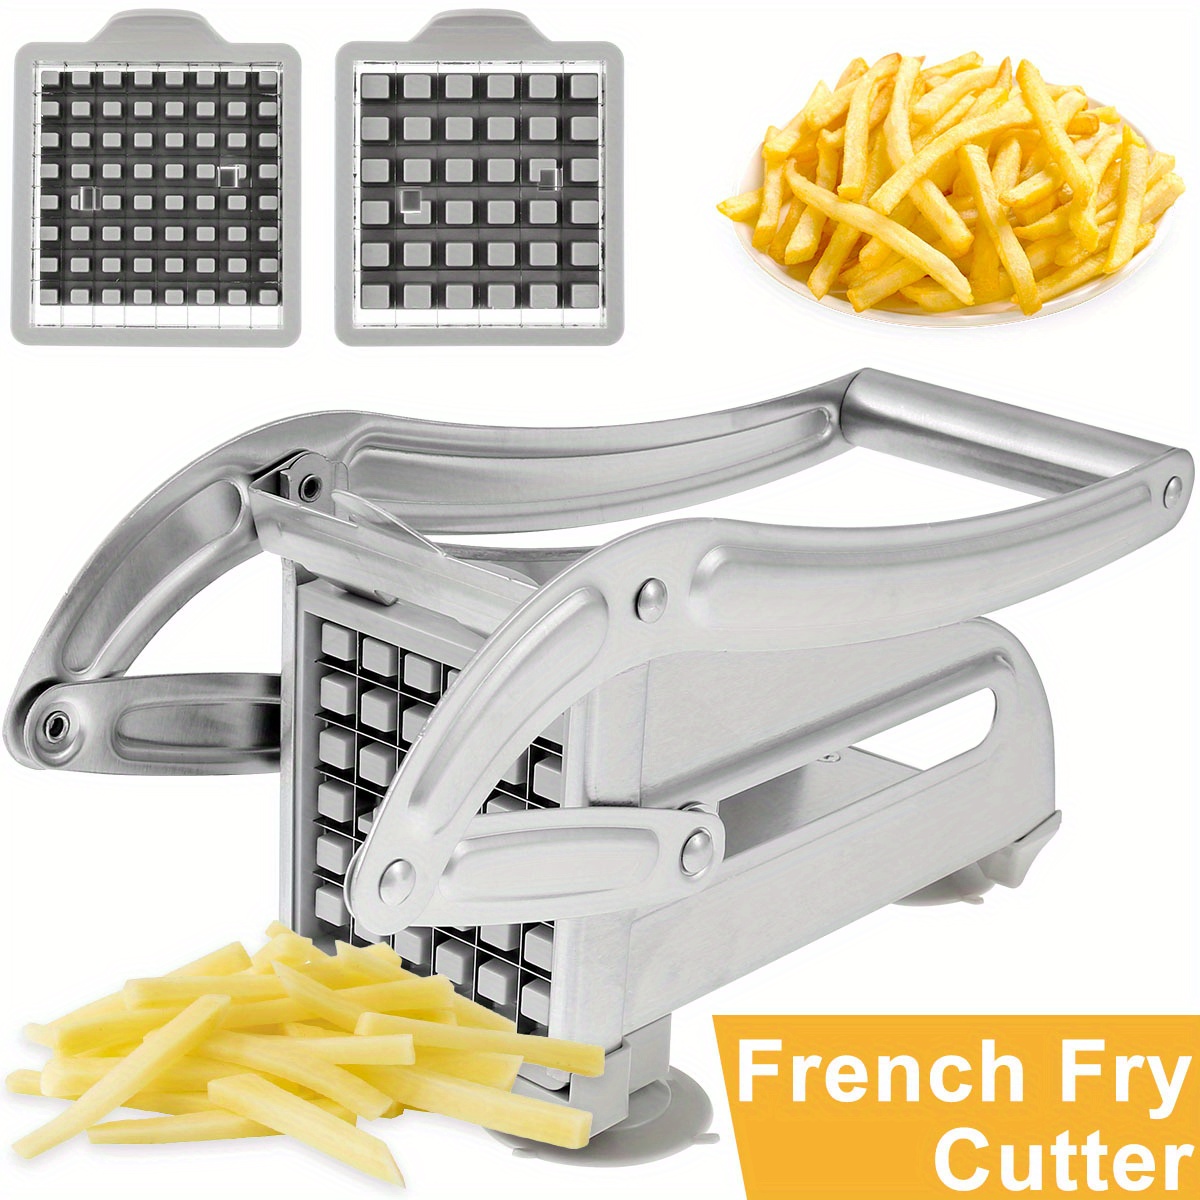 https://img.kwcdn.com/product/french-fry-cutter/d69d2f15w98k18-f2eb9472/open/2023-11-06/1699267637541-ad8cec73a2f34fd0b24ebf22ba8503f2-goods.jpeg?imageView2/2/w/500/q/60/format/webp